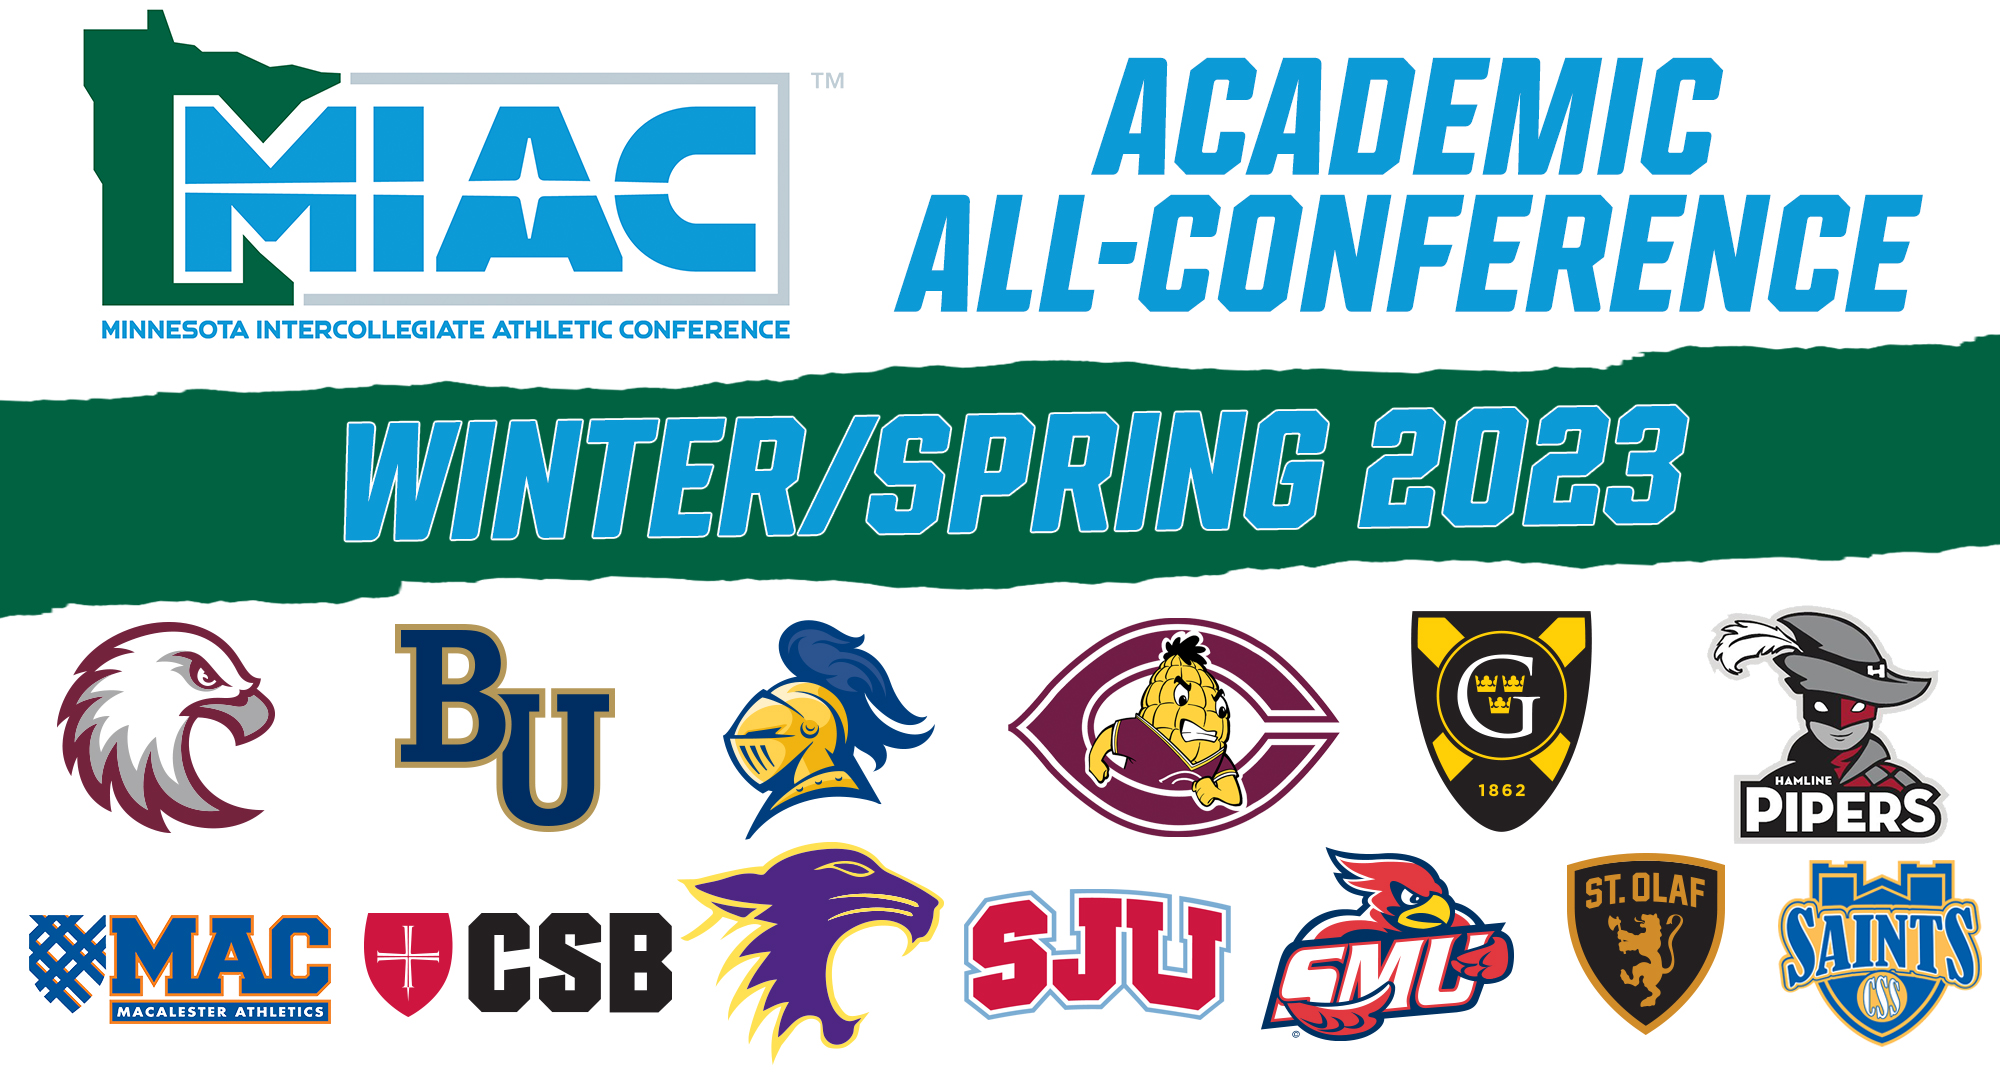 Concordia had a record-setting 102 student-athletes from the winter and spring seasons earn MIAC Academic All-Conference honors.